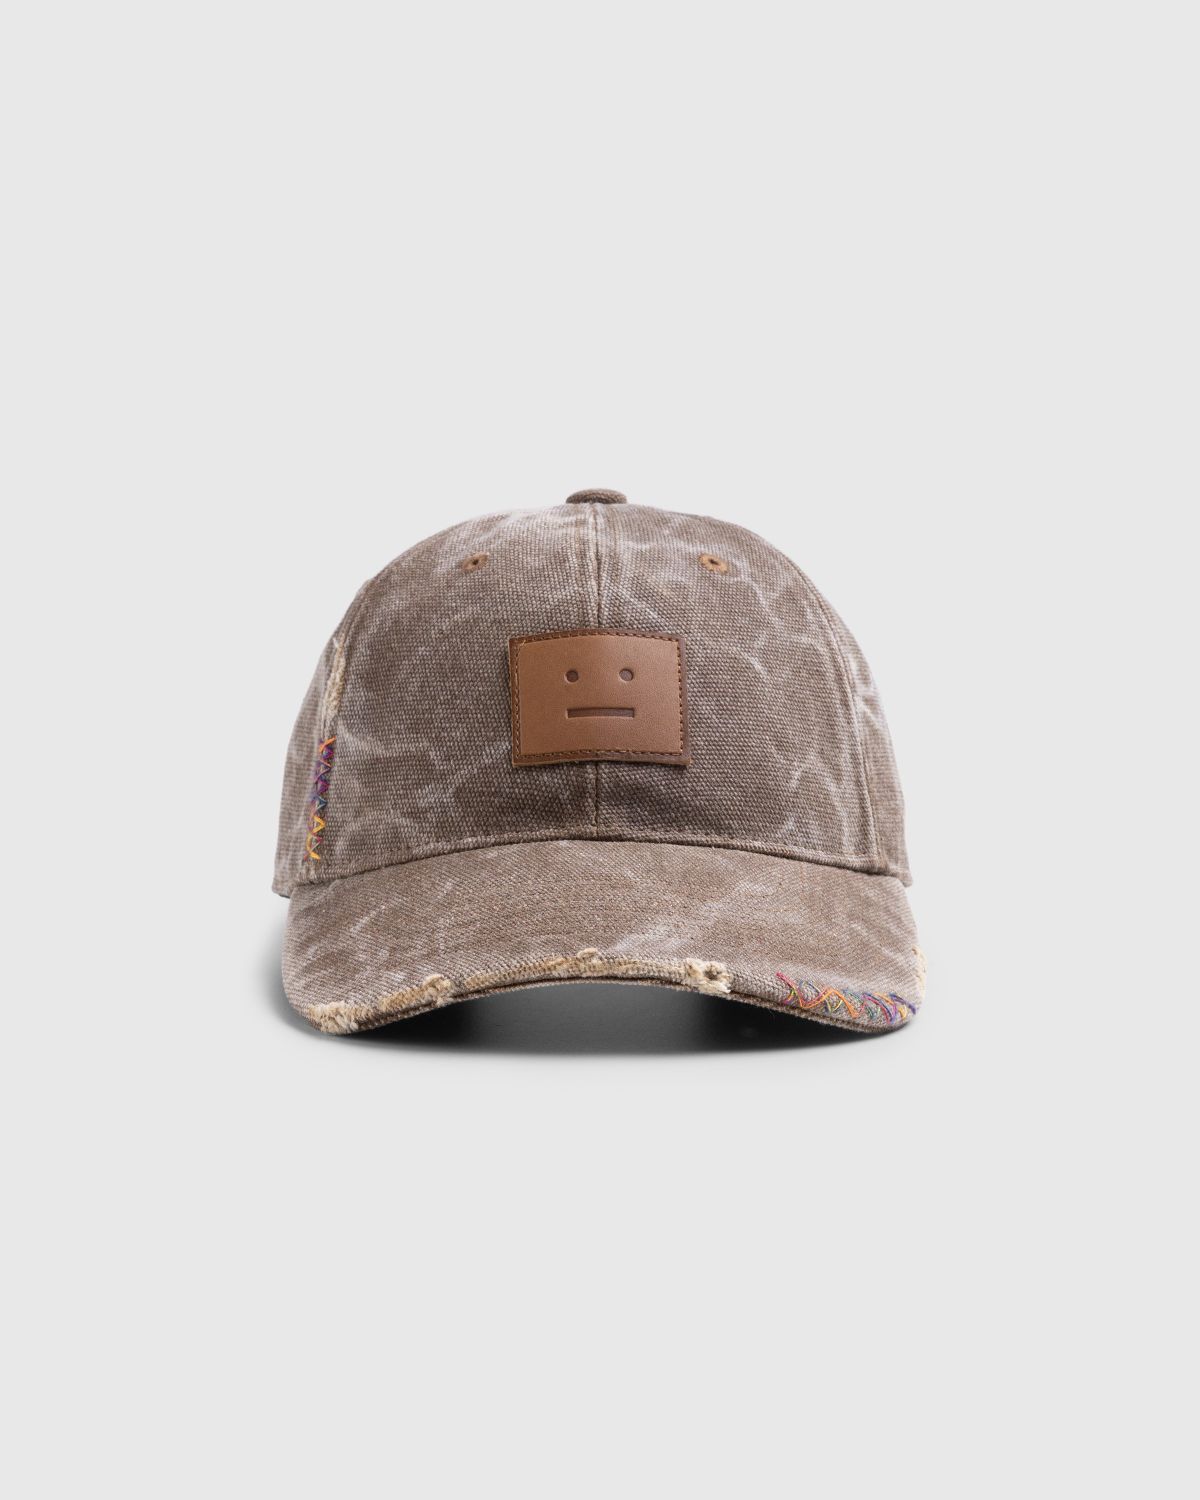 Acne Studios – Leather Face Patch Cap Toffee Brown | Highsnobiety Shop